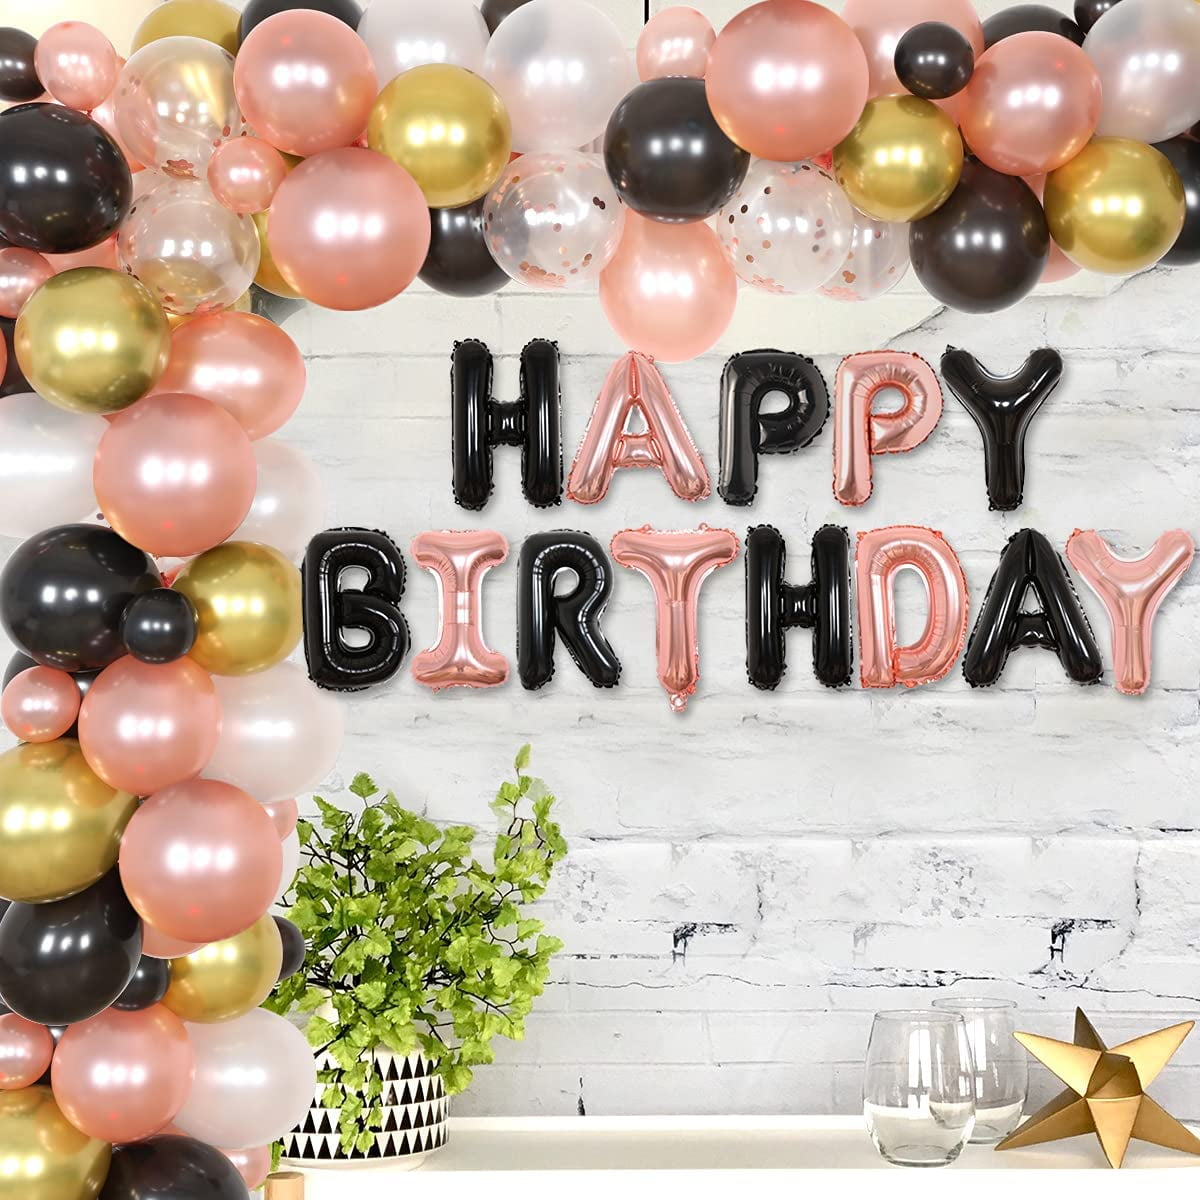 Black and Rose Gold Birthday Decorations - Rose Gold Black Balloon Garland  Kit Happy Birthday Backdrop for Women Girls Sweet 16th/18th/30th/40th/50th